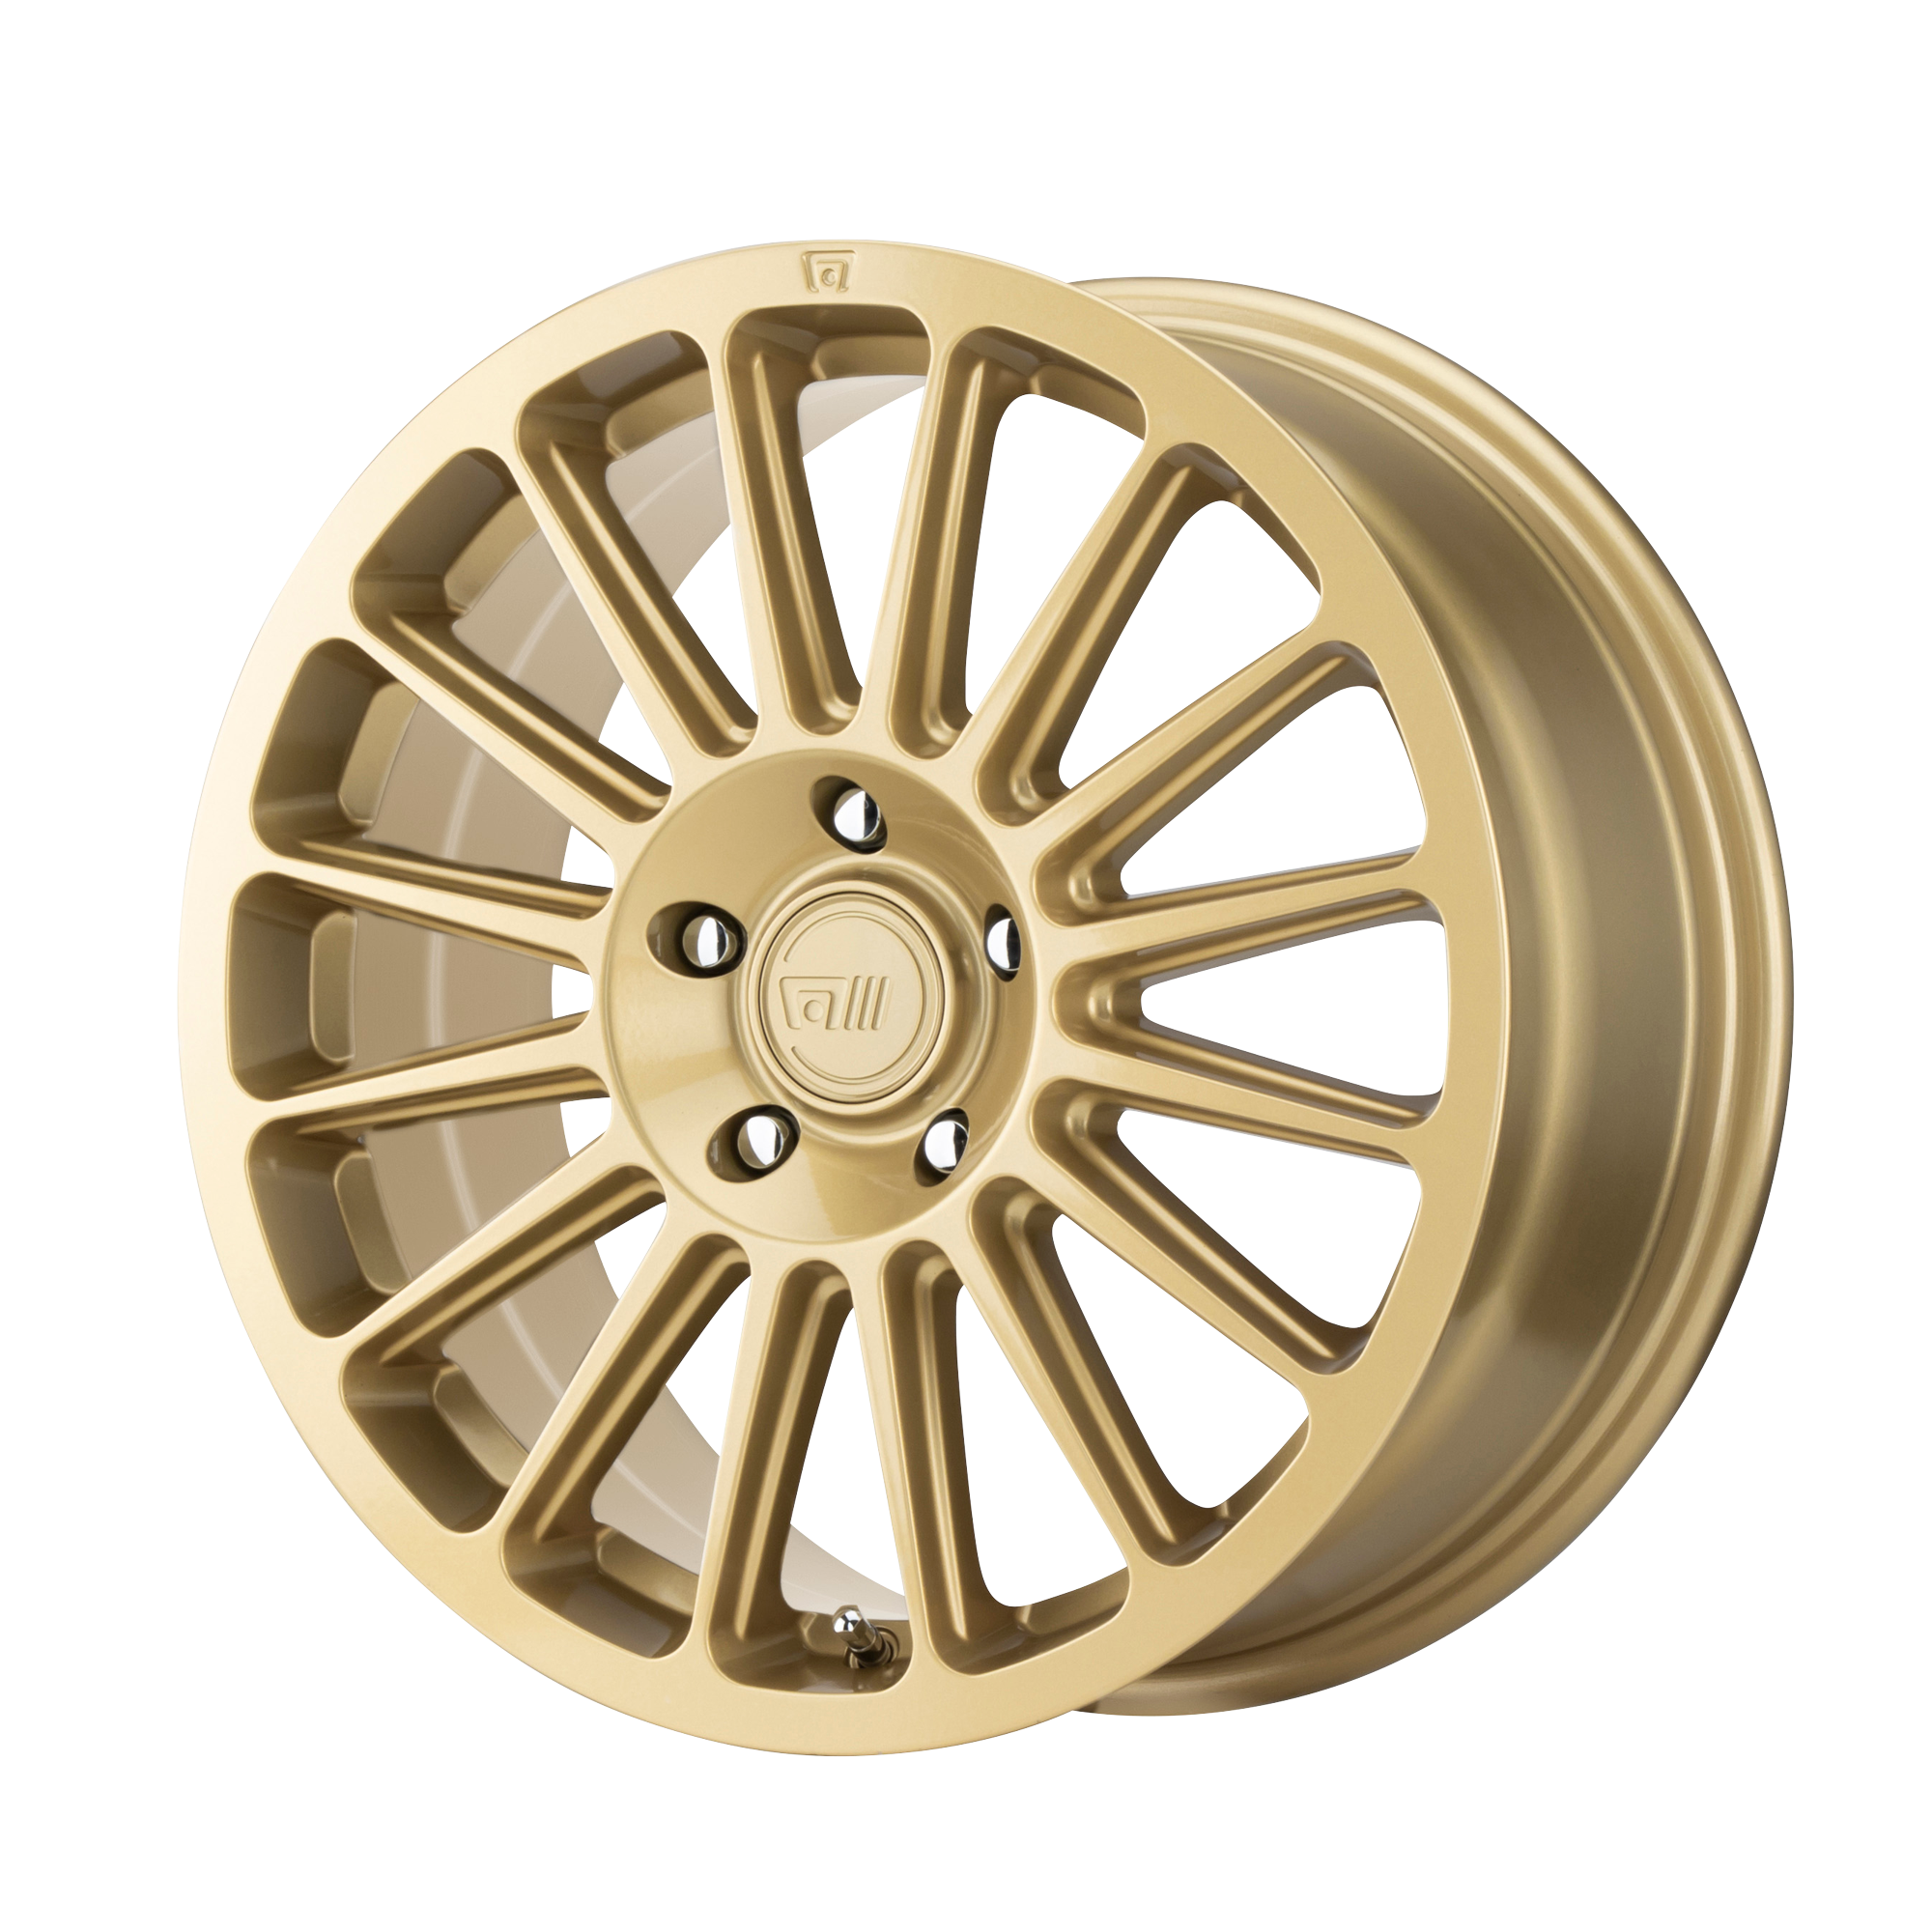 MR141 16x7.5 5x100.00 RALLY GOLD (40 mm) - Tires and Engine Performance